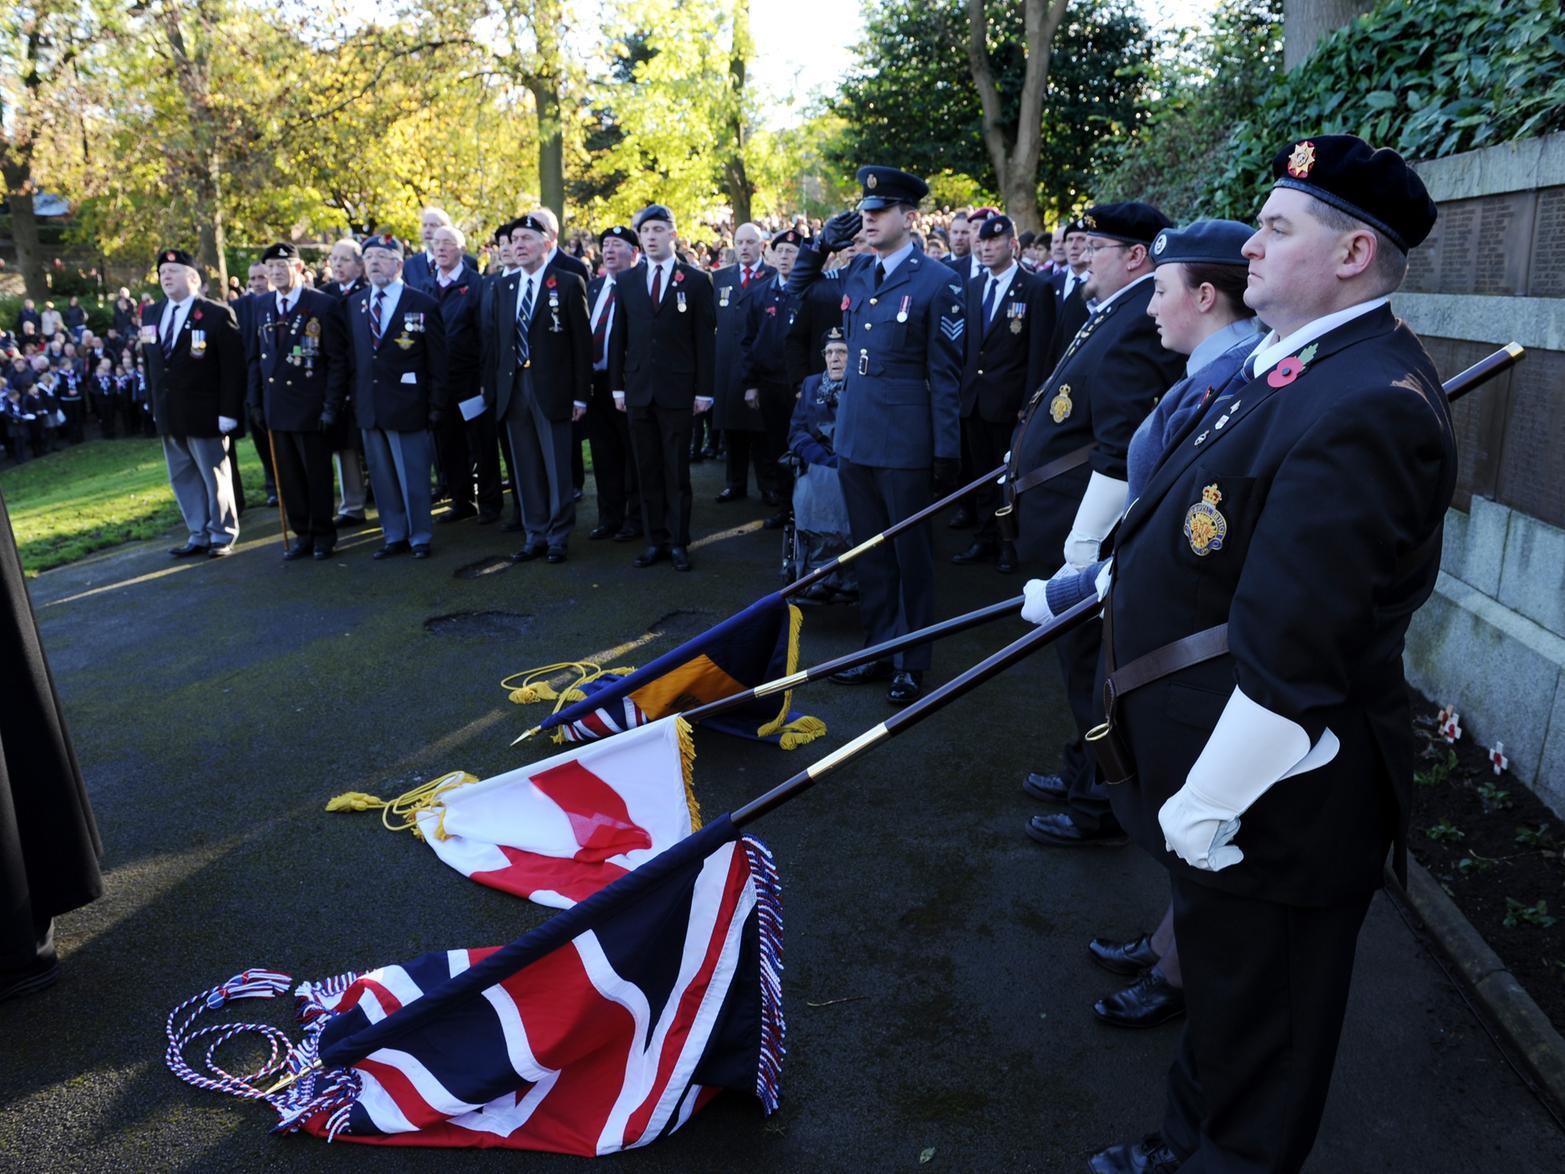 The Remembrance Day service at Scatcherd Park in Morley.